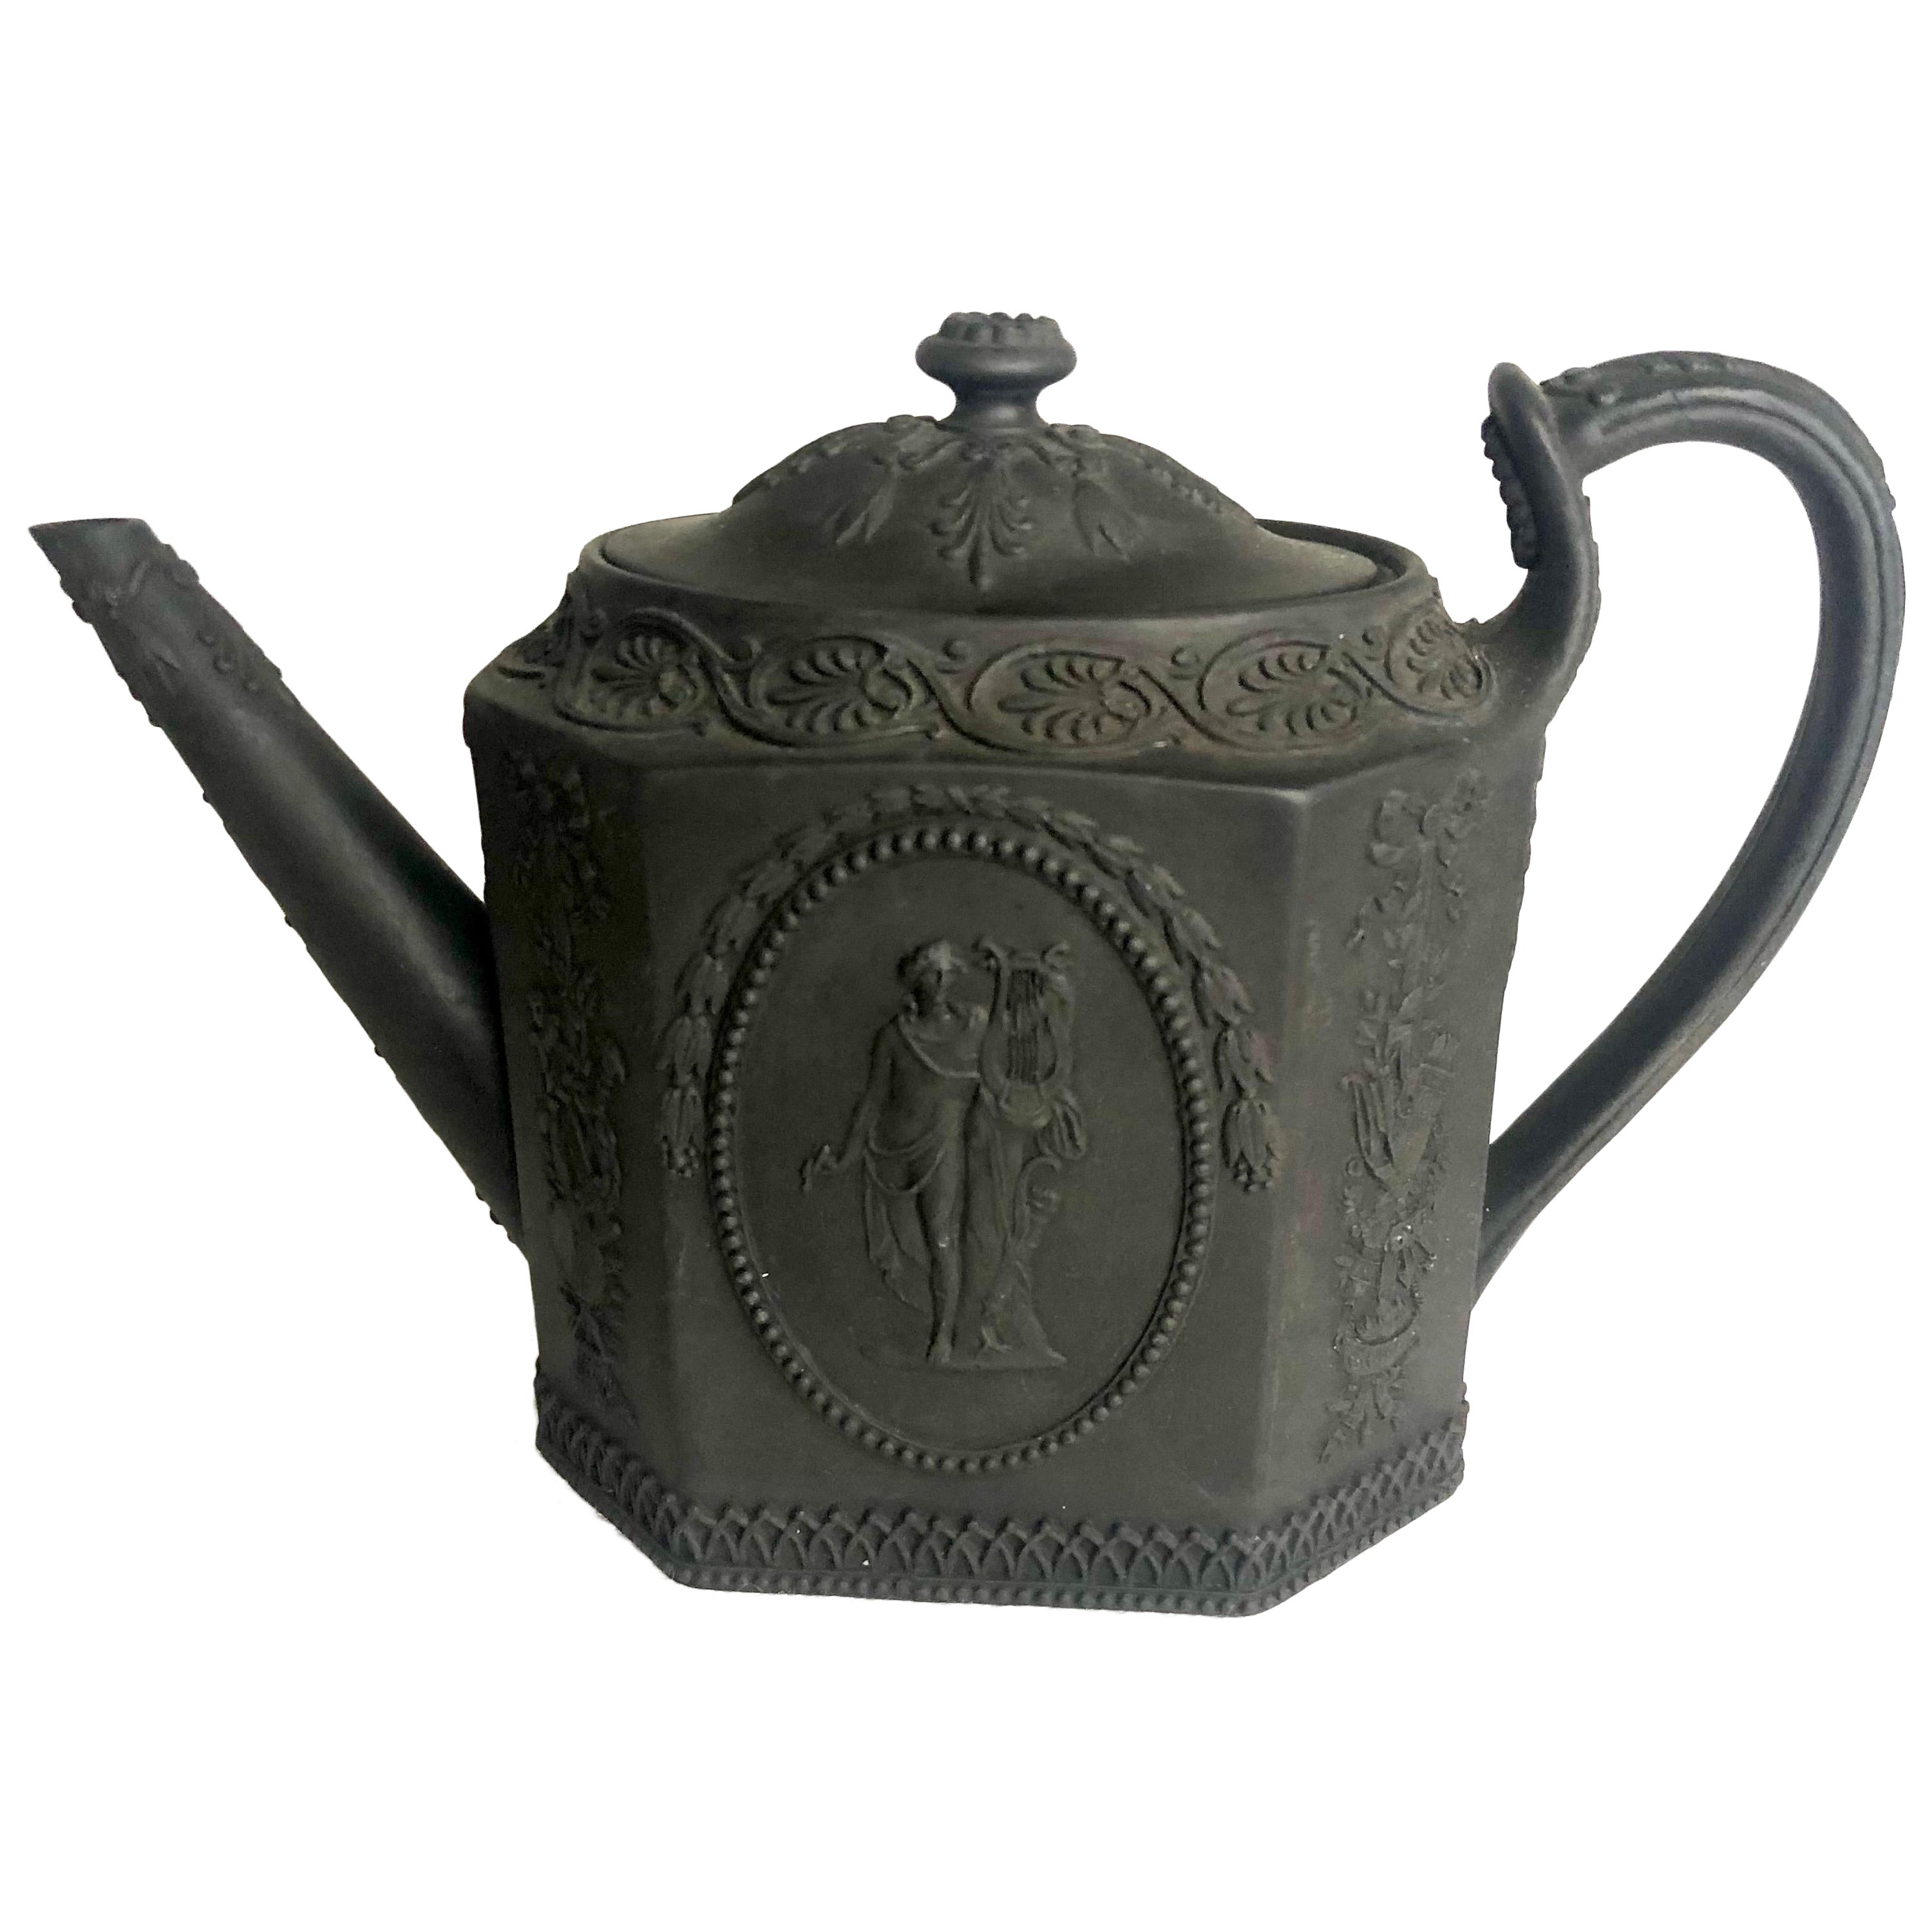 Basalt Wedgwood Teapot with Medallions of Man with Lyre and Lady on Pedestal